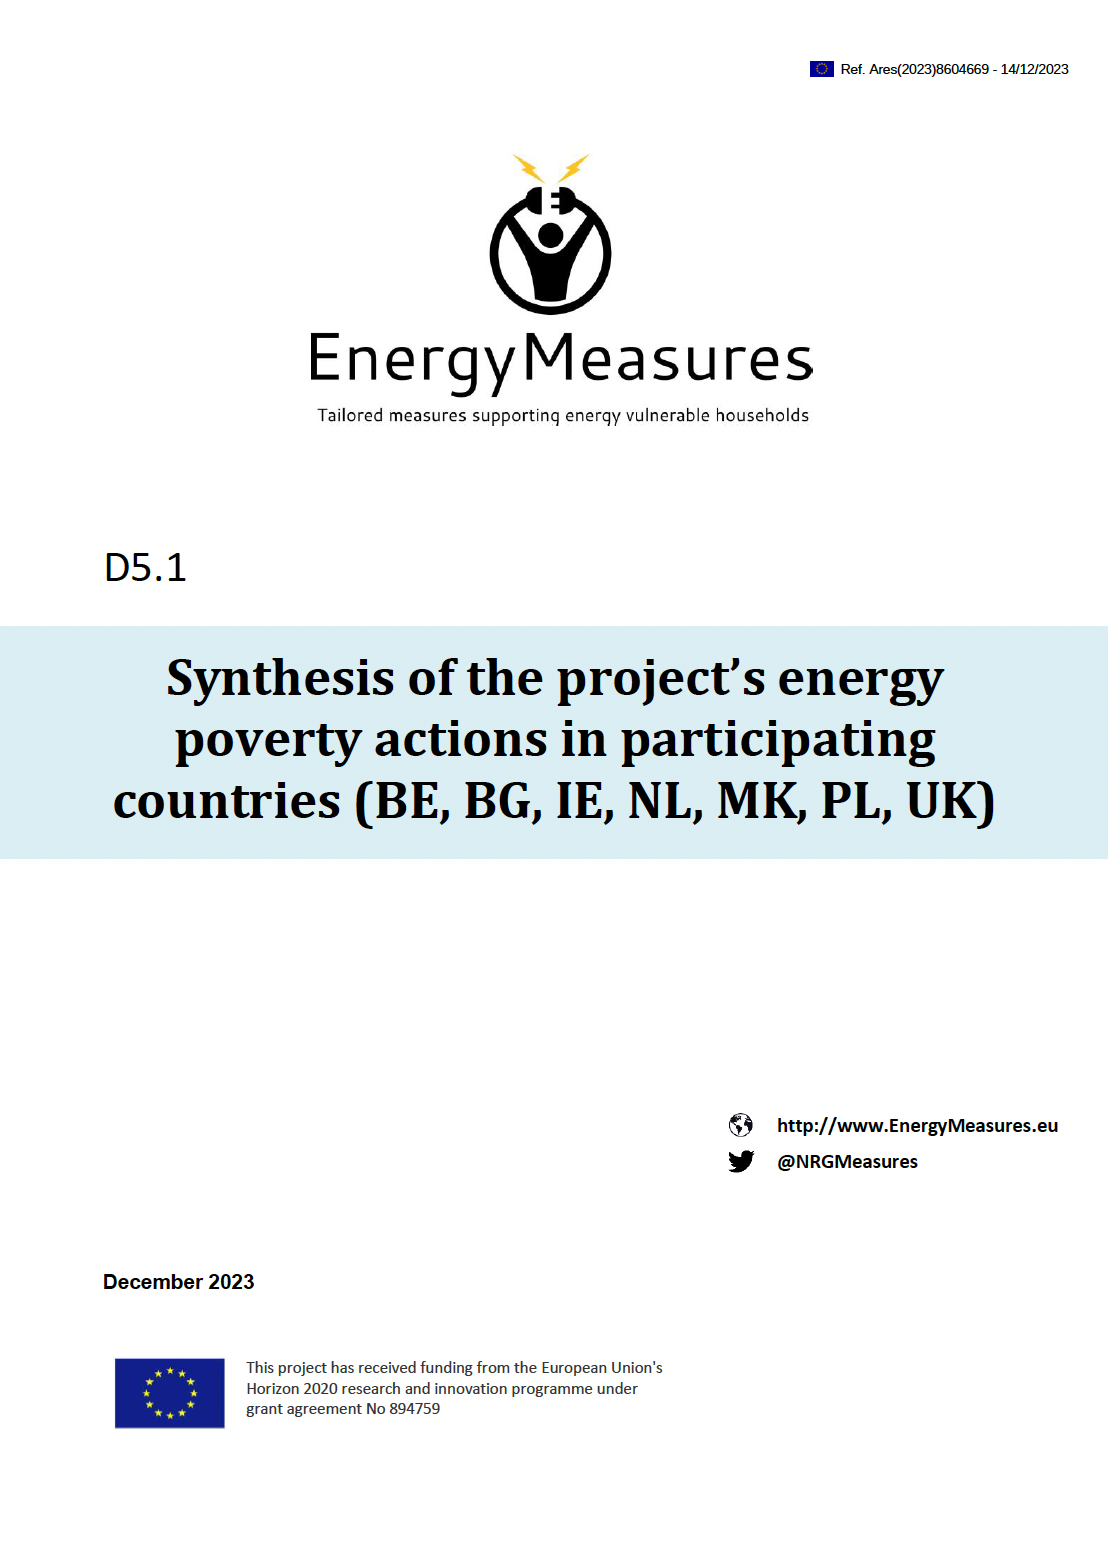 D5.1 Synthesis report of energy poverty actions in seven European countries